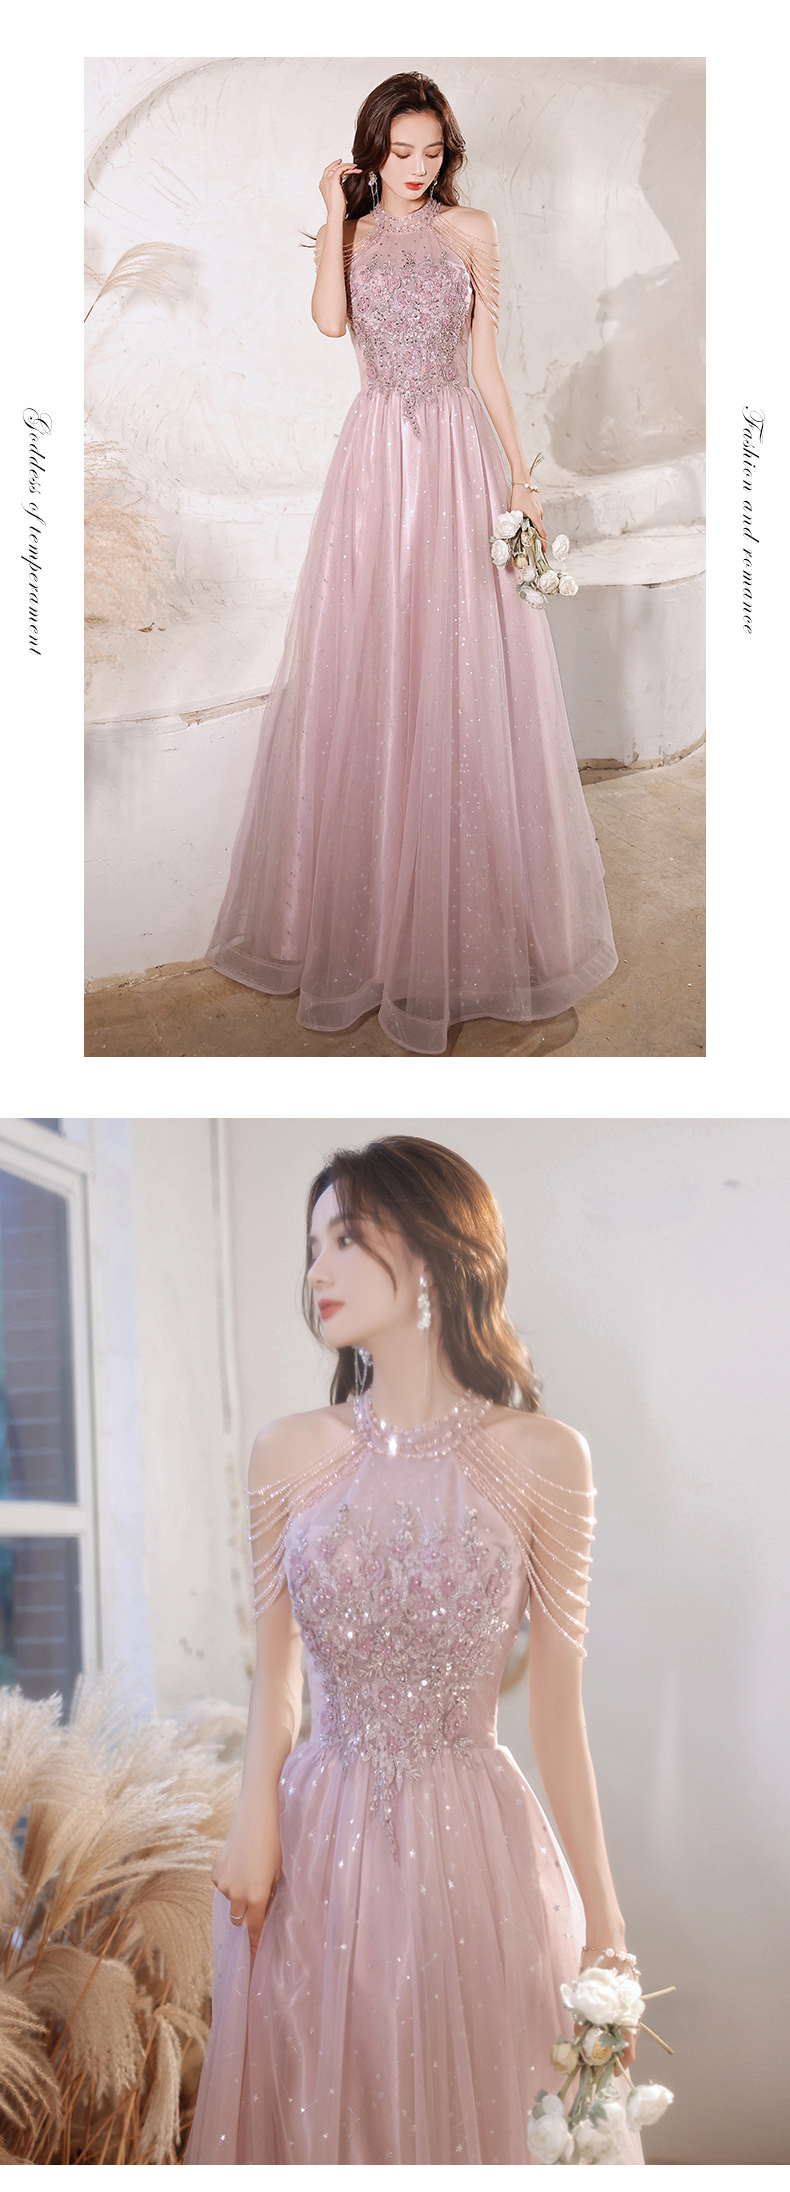 Elegant Pink Tulle Evening Gown Long Formal Prom Party Dress14